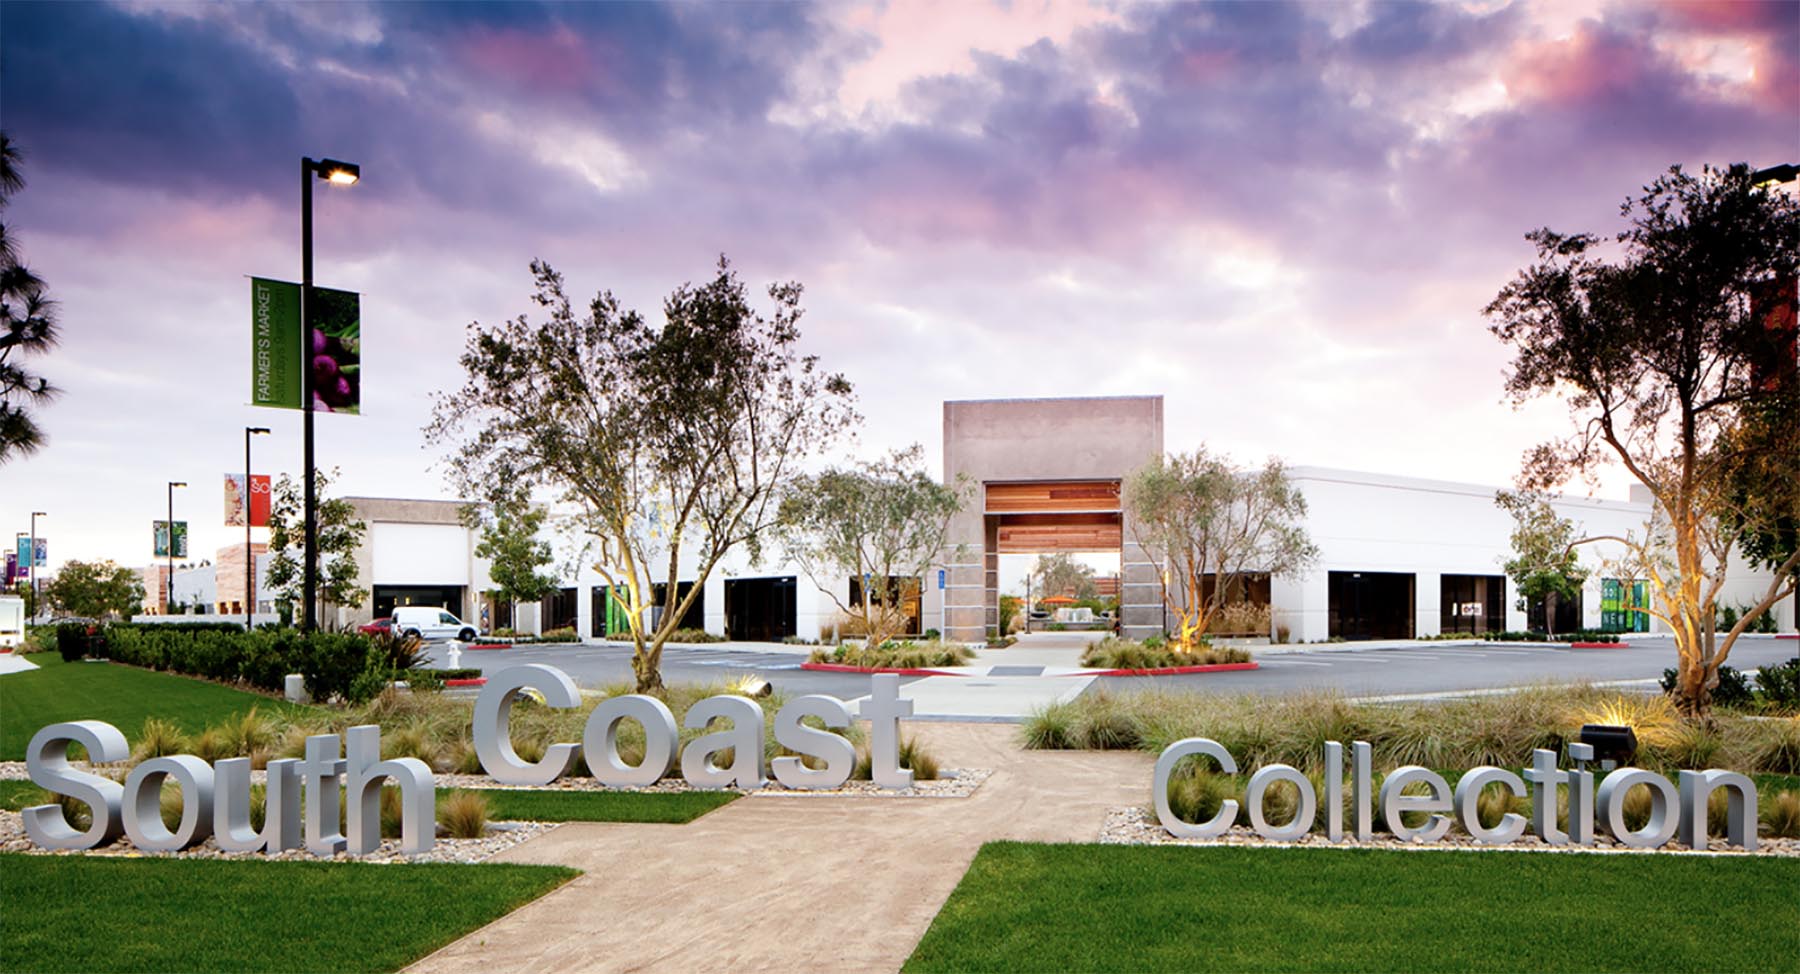 South Coast Collection – Retail Outlet